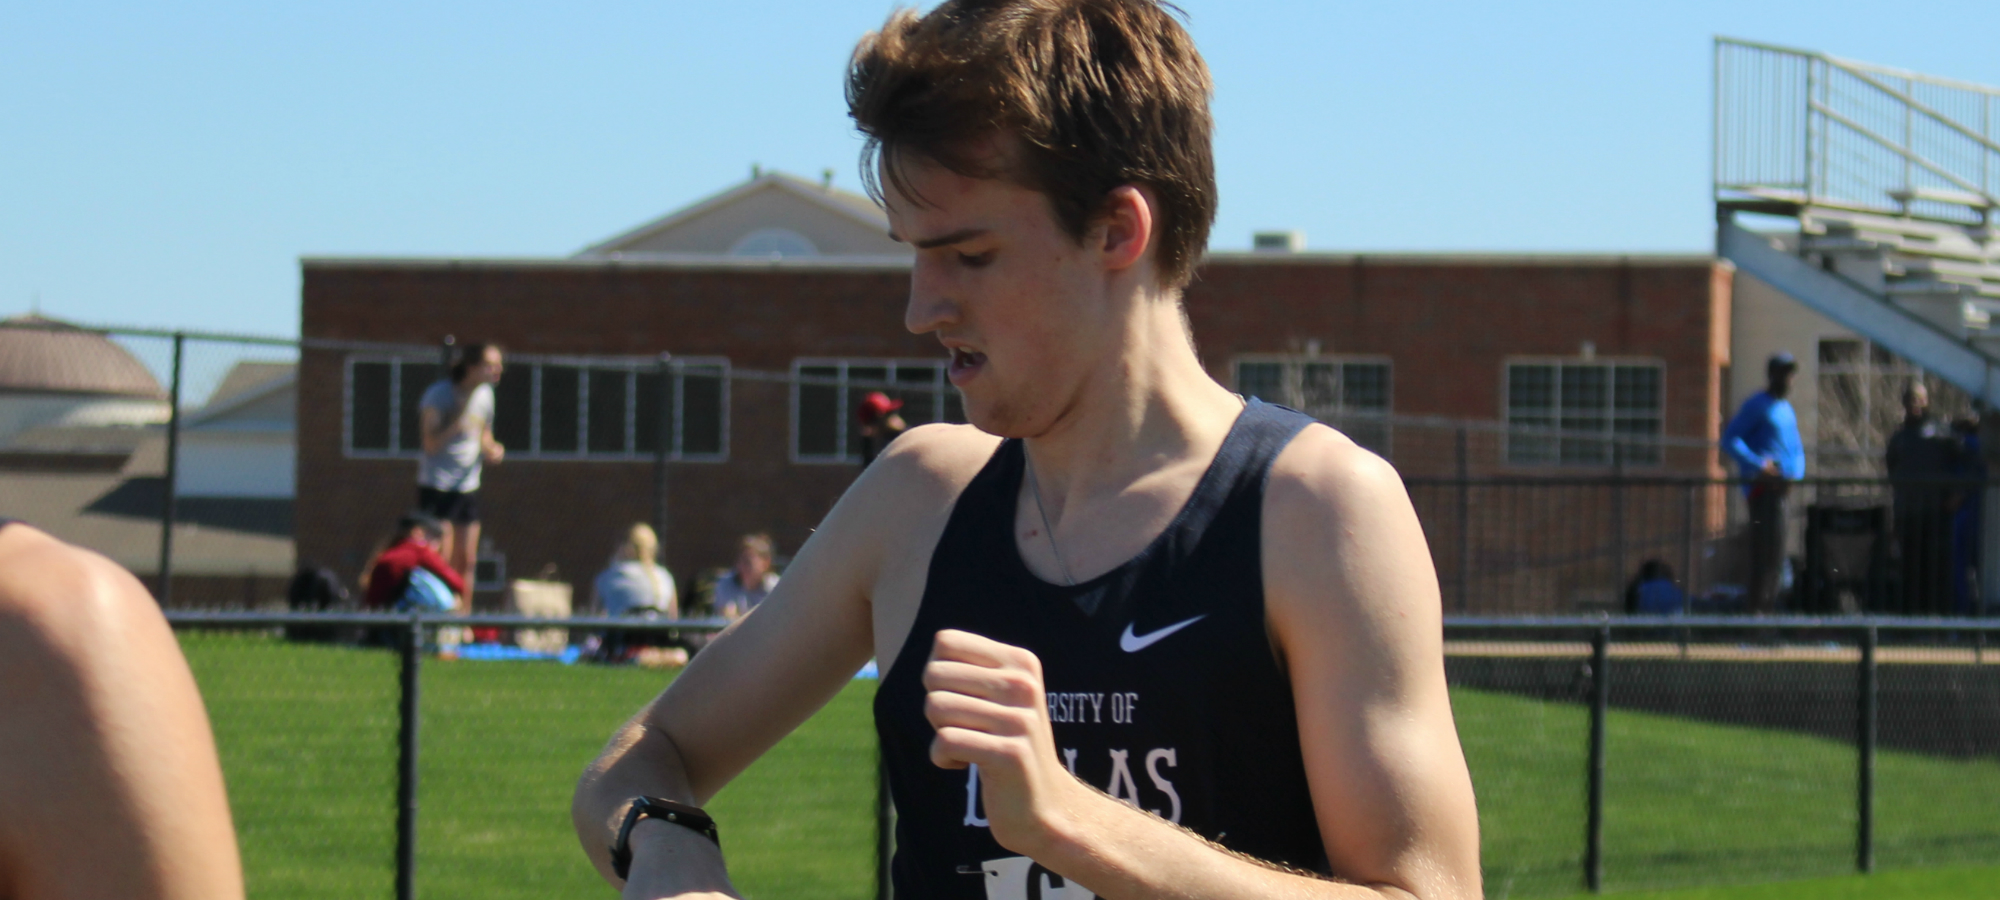 Kilmer set his 2nd Record in as many competitions on Saturday.